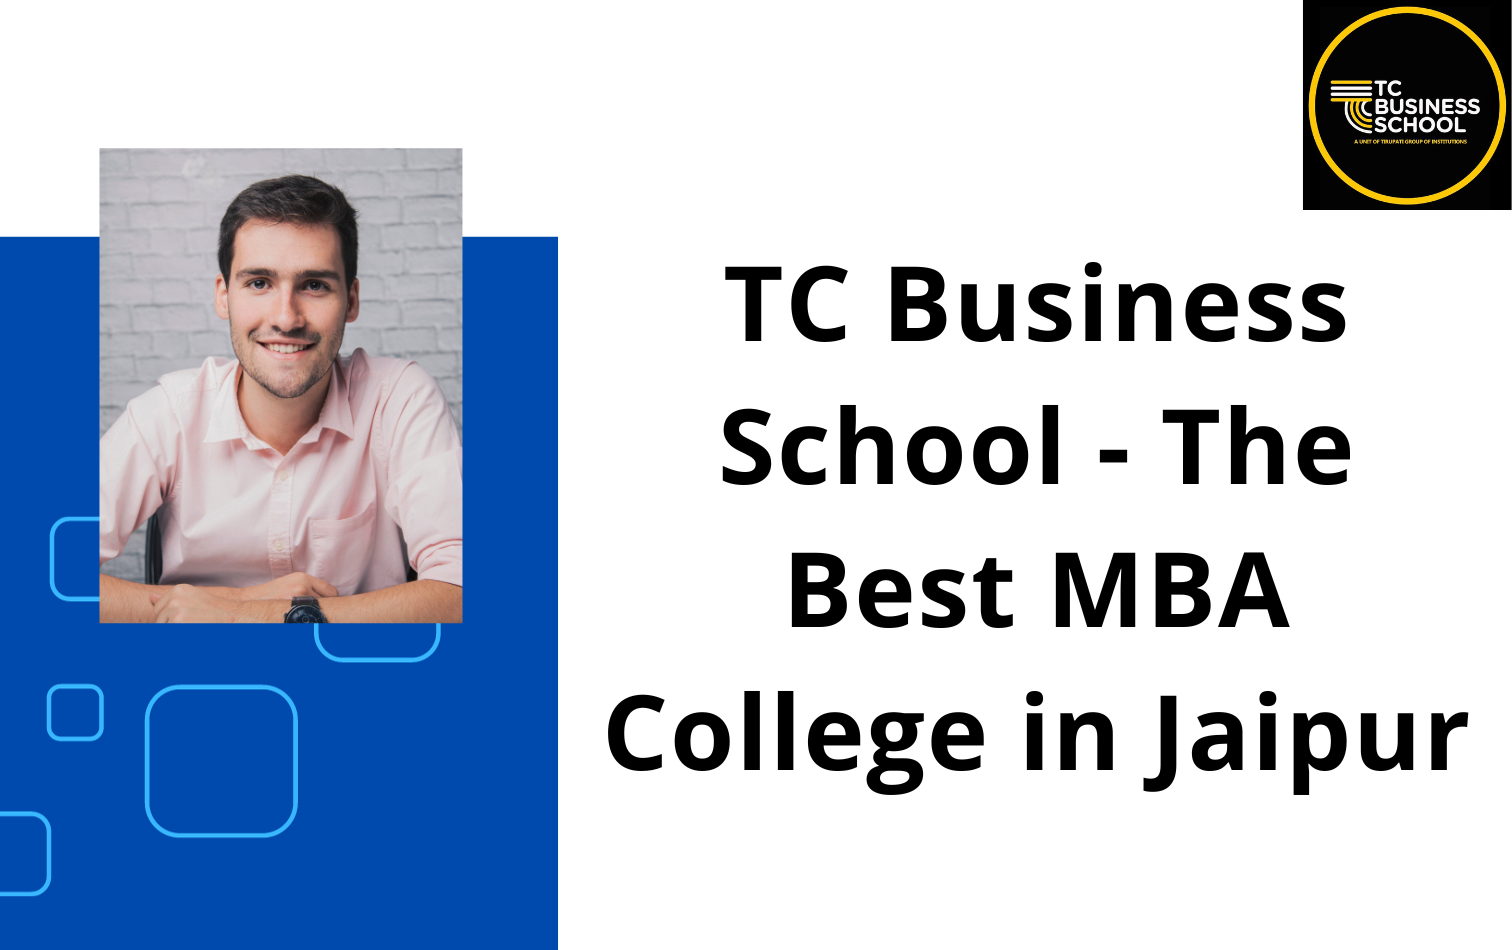 TC Business School – The Best MBA College in Jaipur